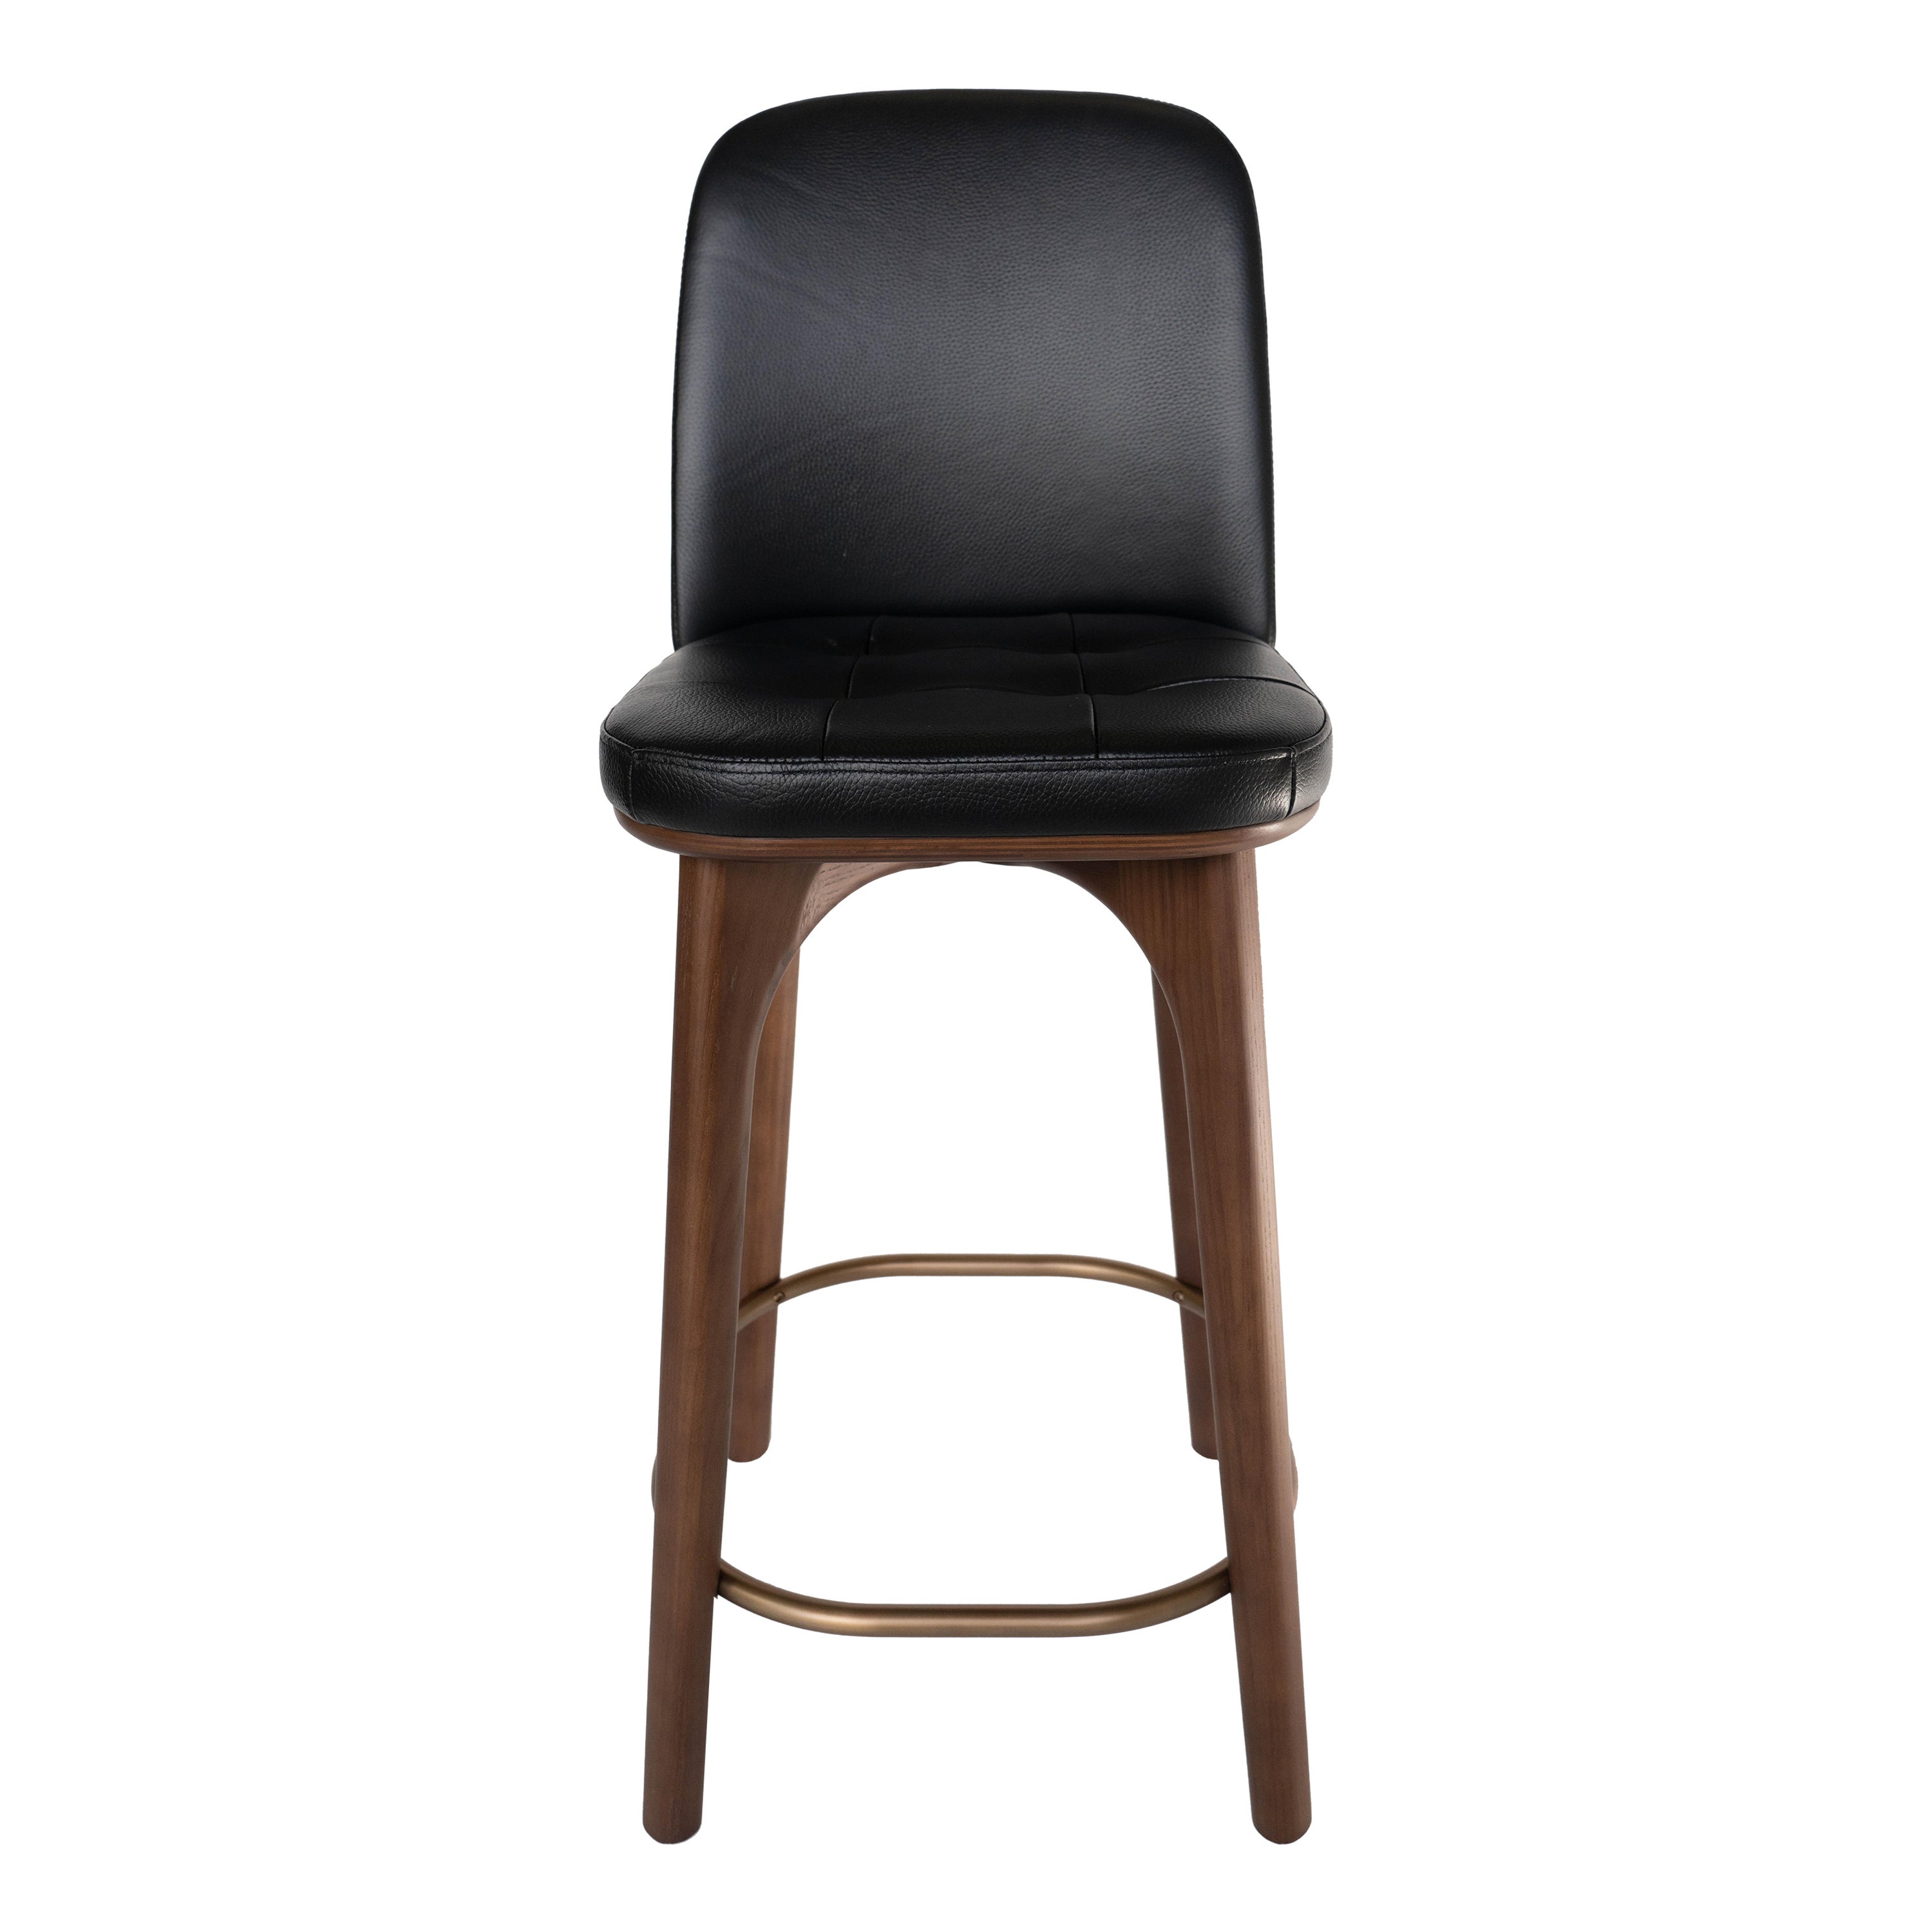 Stellar Works Utility Counter Chair Walnut stained Ash, Caress Black Leather For Sale